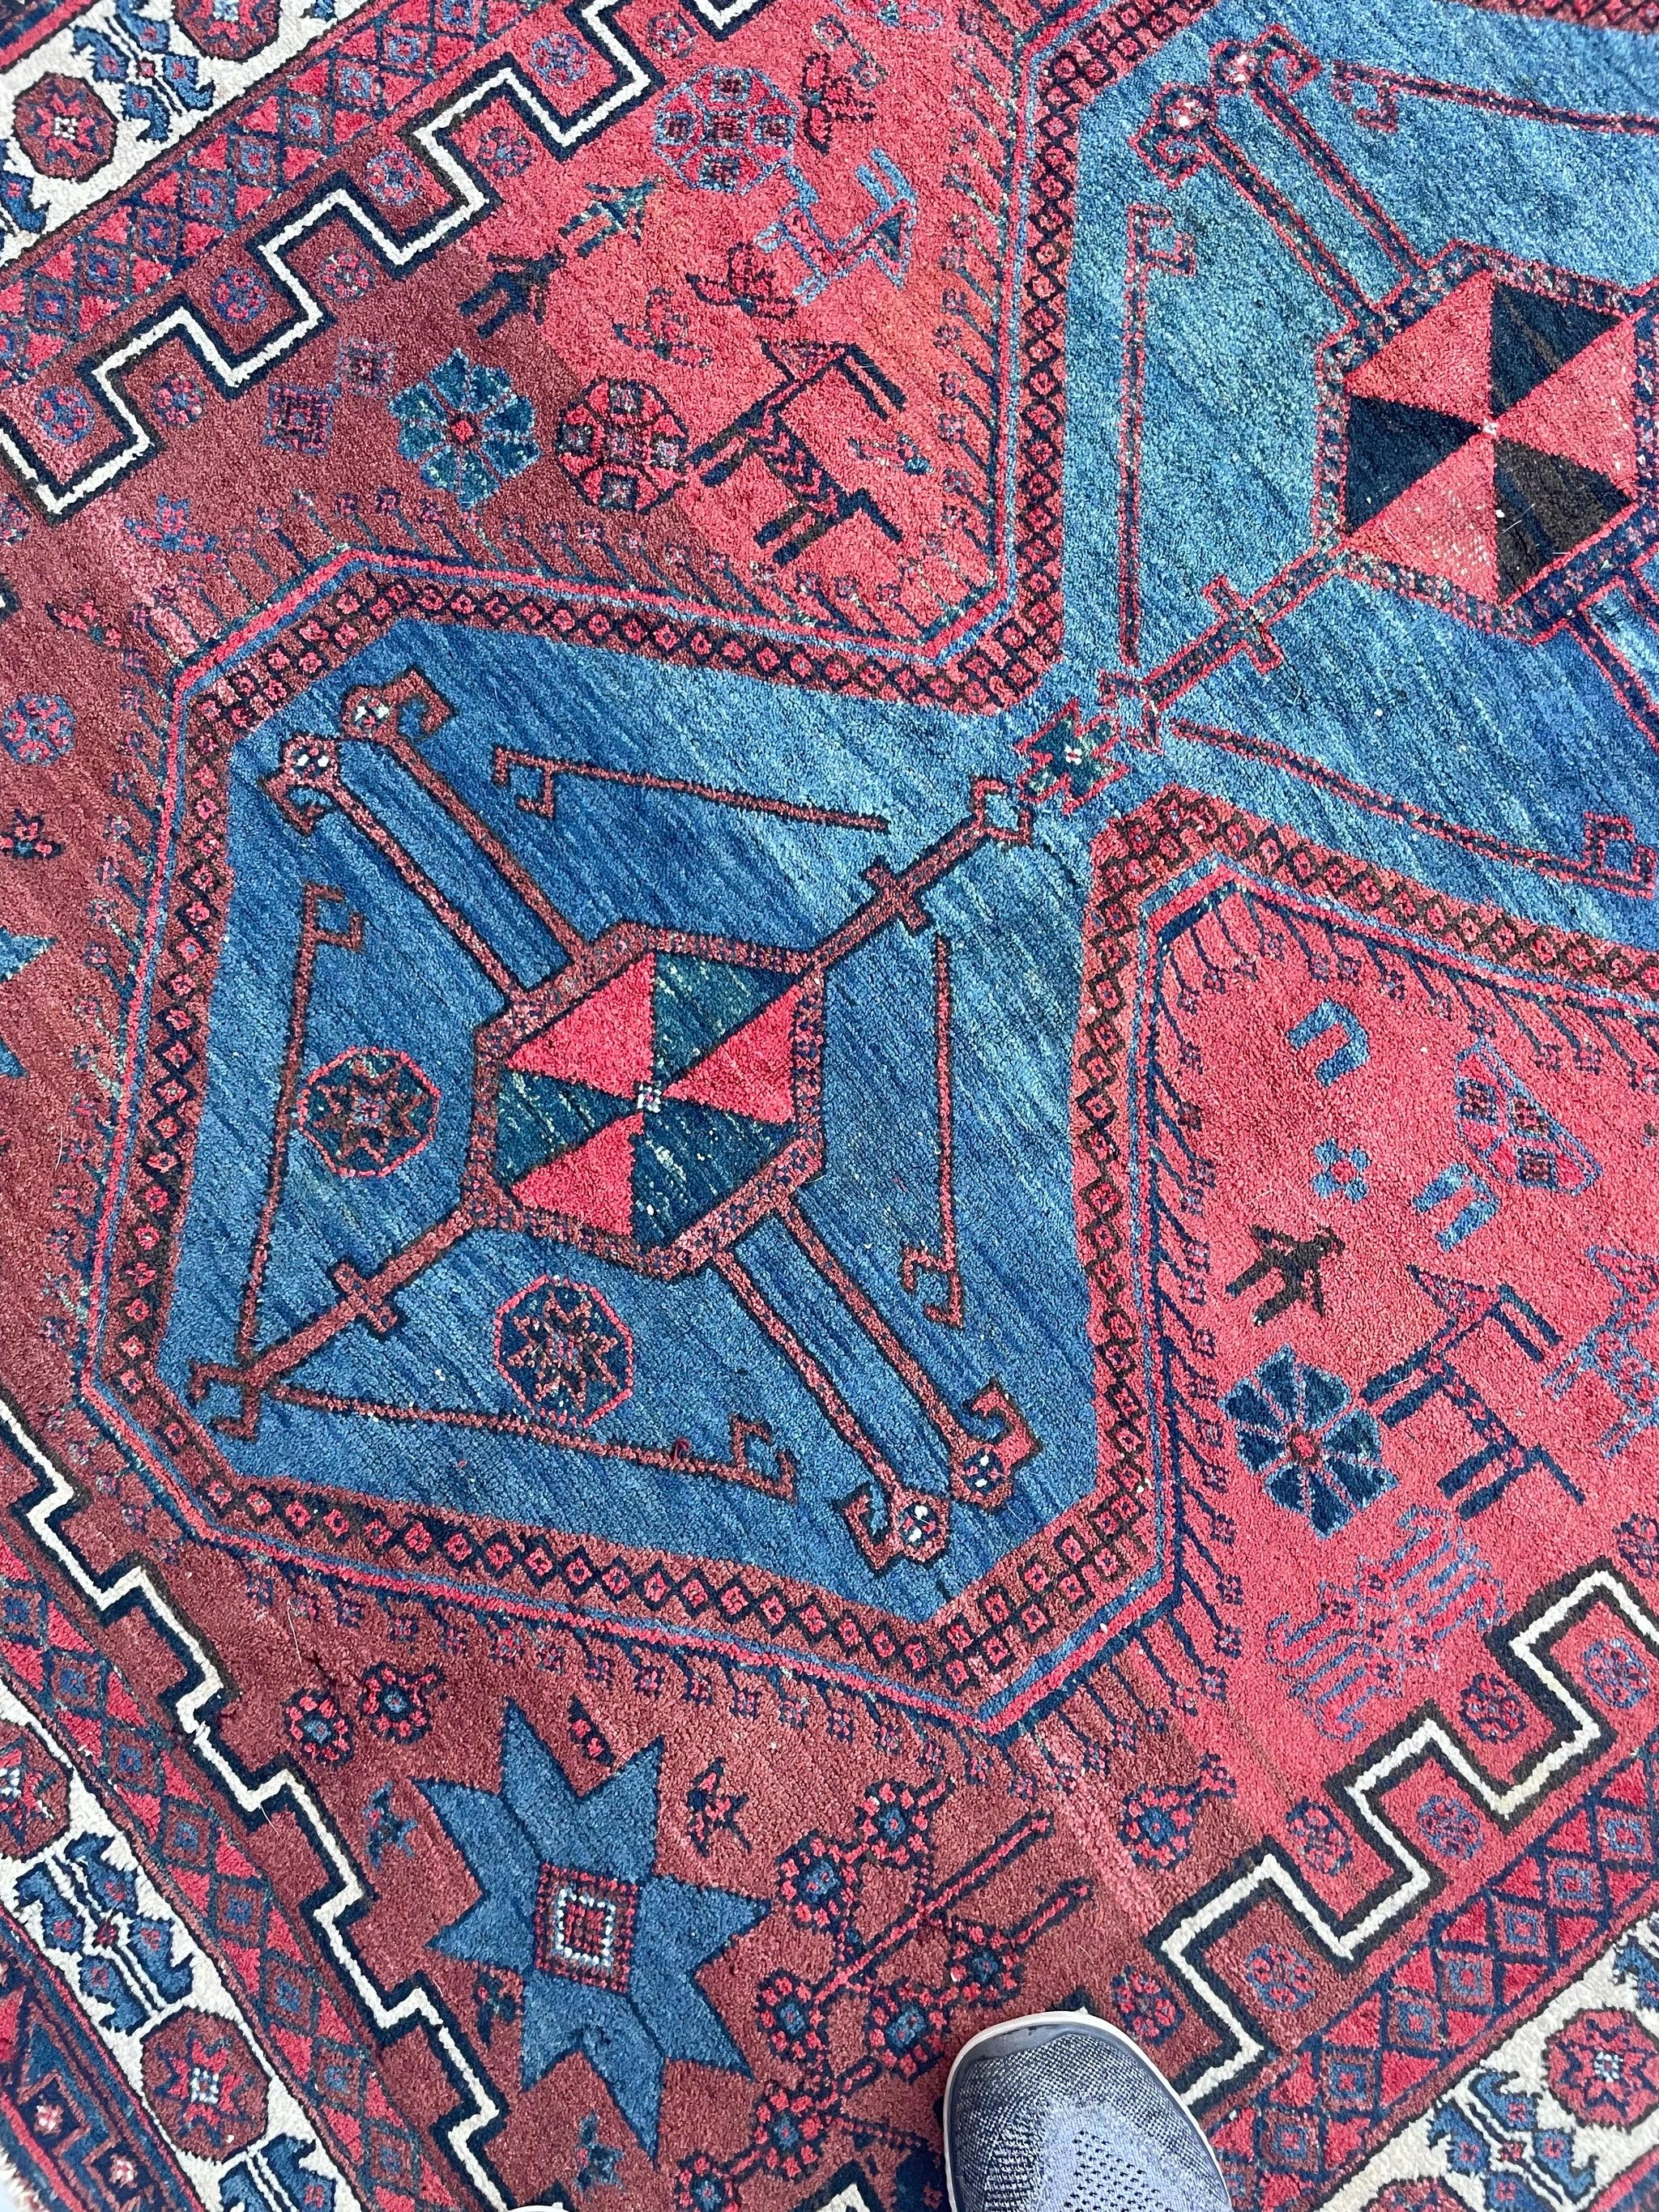 Unicorn Vintage Shiraz Rug  Village Life Woven Throughout  Clay, Ice Blue, Charcoal

About: One of my personal favorites - something about the colors, the design, and the intent with the camels, gazelle, deer, and birds woven in with human subjects